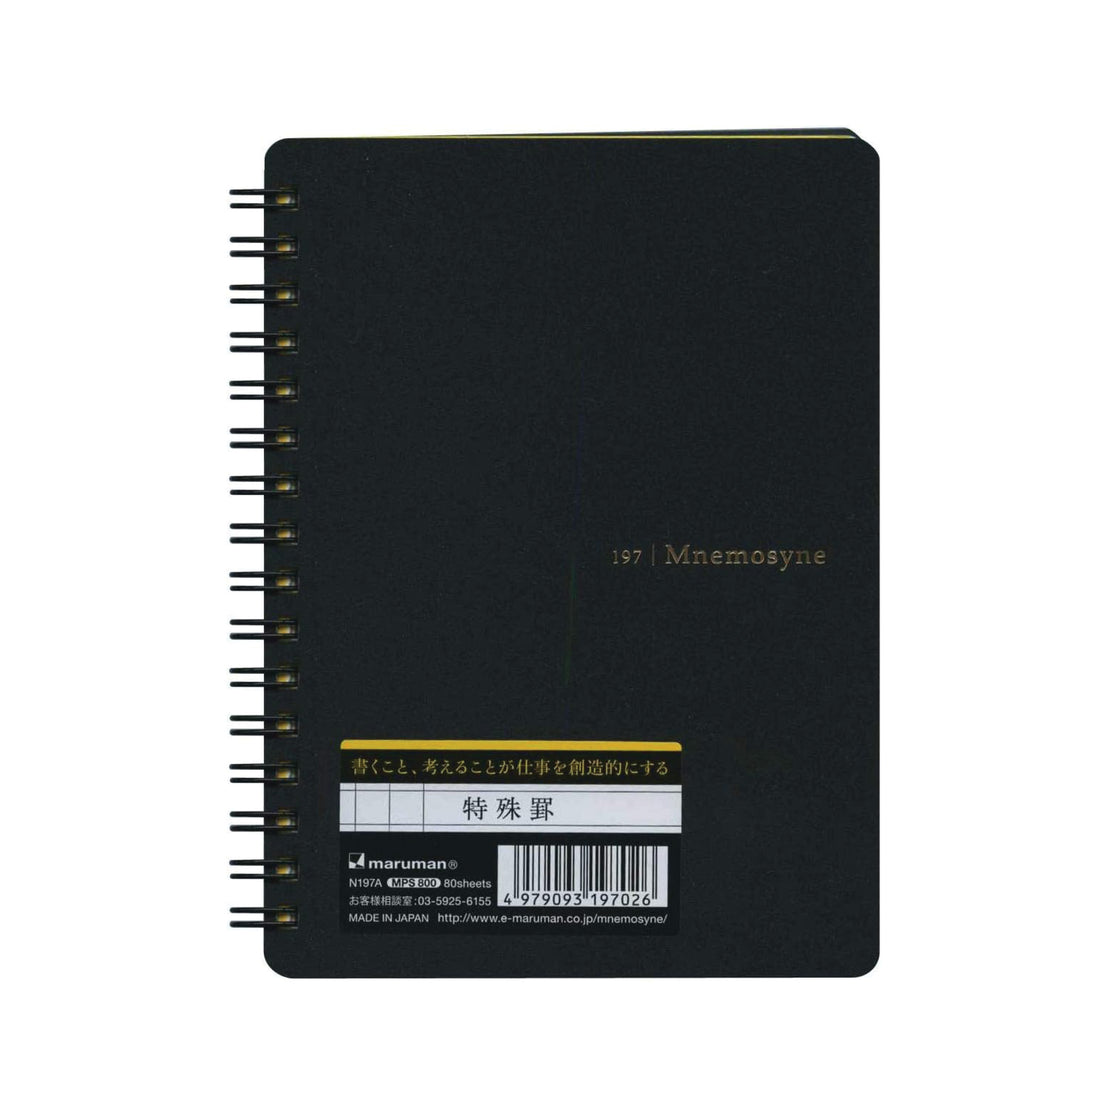 Special Rule A6 Perforation Notebook, Maruman